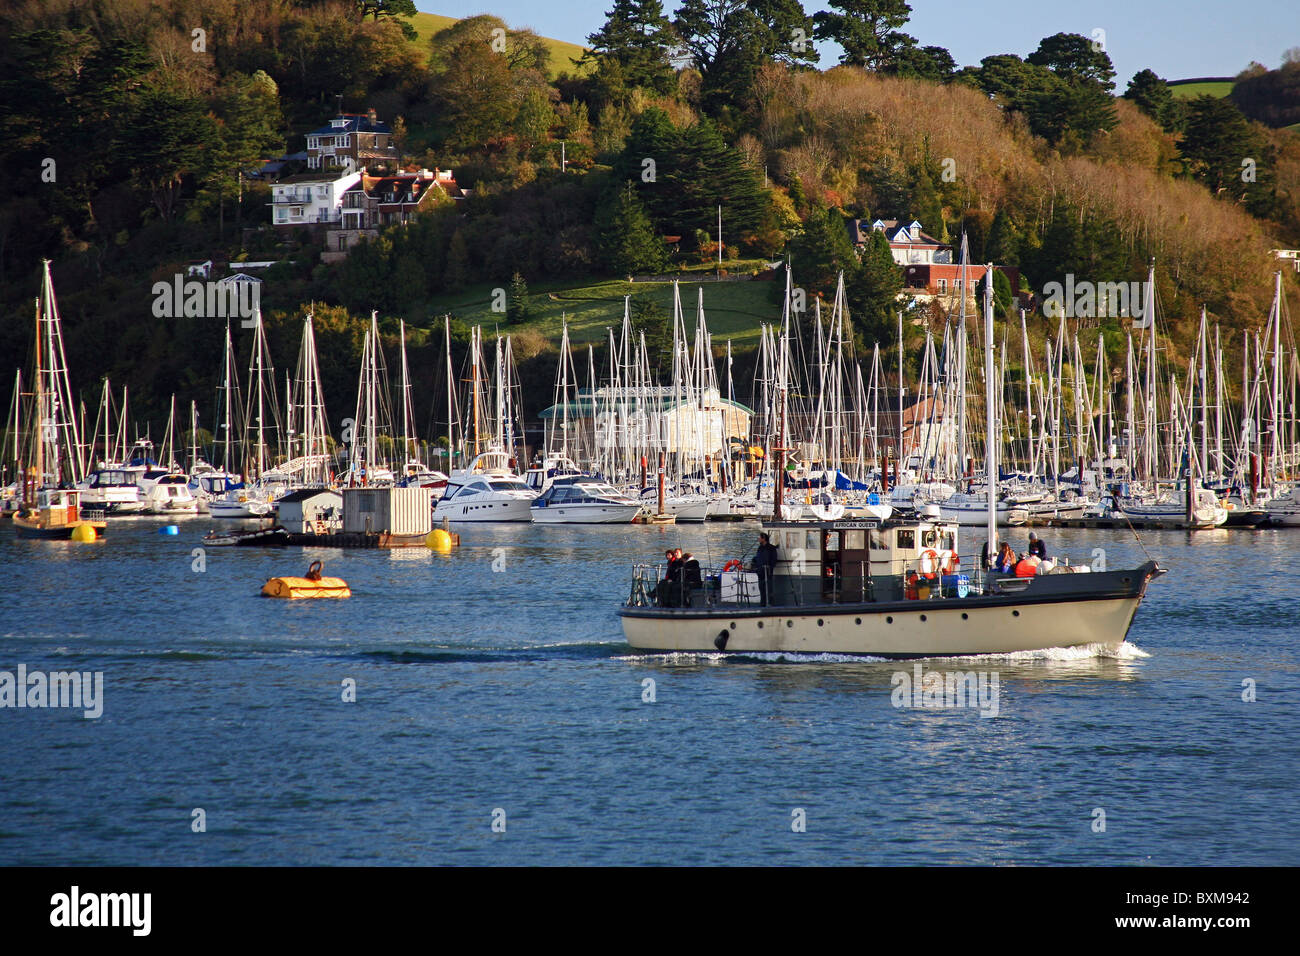 The 'African Queen' a fishing 'hire' boat makes its way down the River Dart past Dartmouth, Devon, England, UK Stock Photo